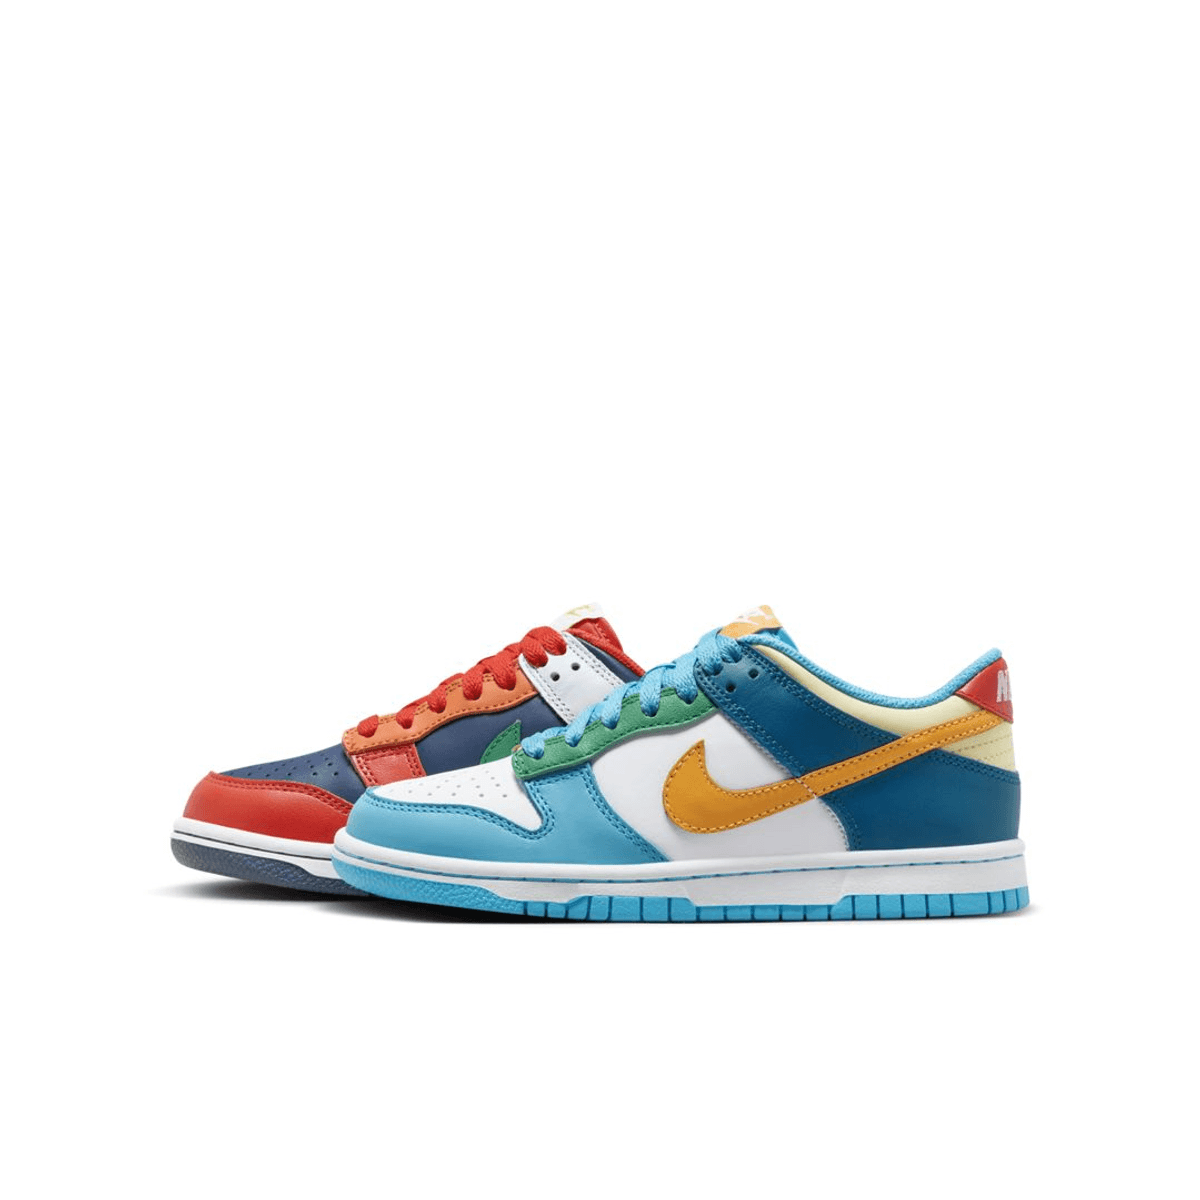 The Nike Dunk Low GS "What The" Releases November 3rd